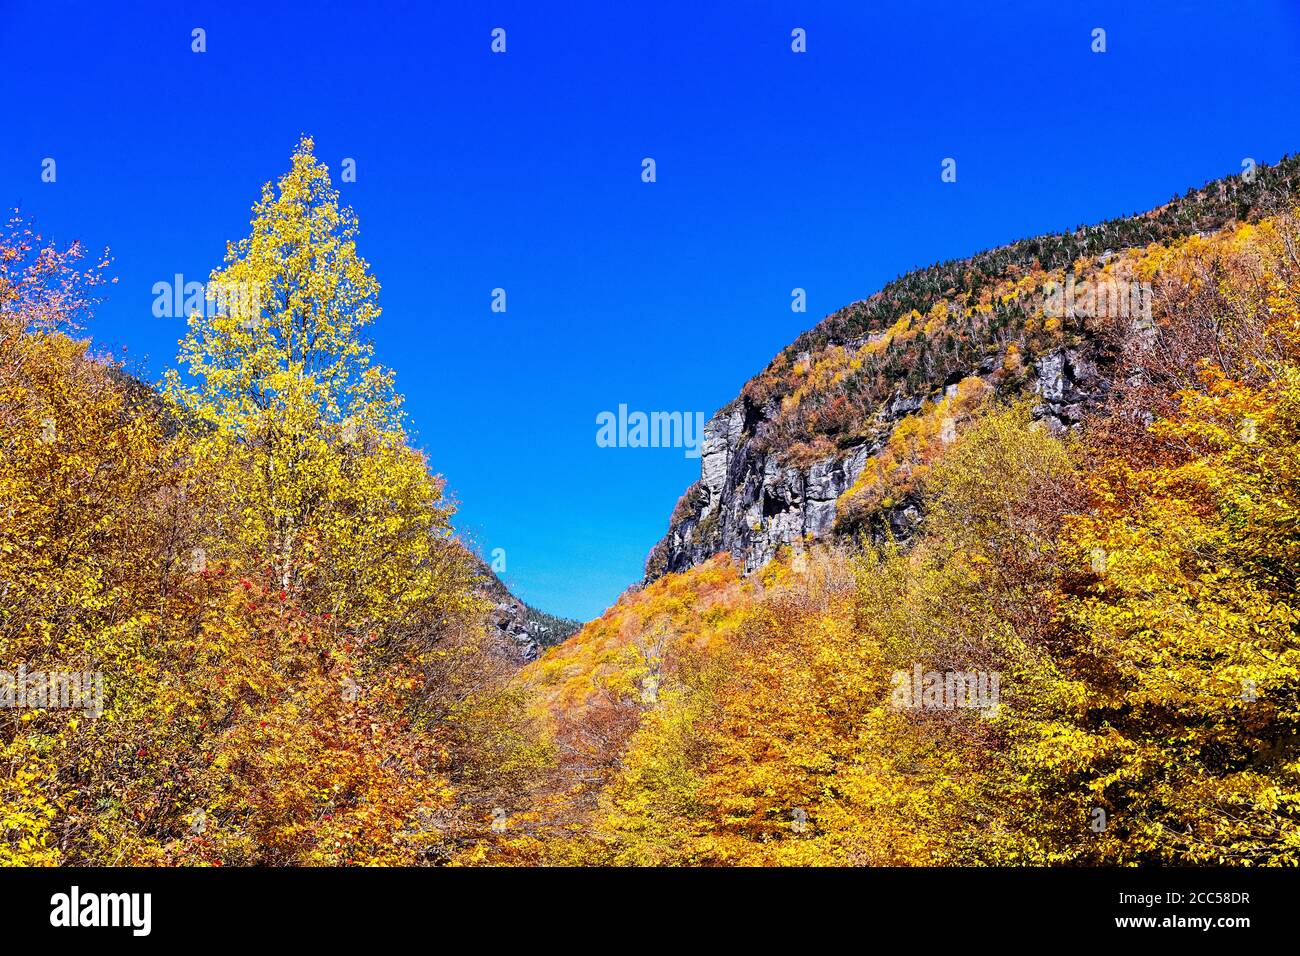 Scenic autumn landscape at Smugglers Notch State Park, Vermont, USA. Stock Photo